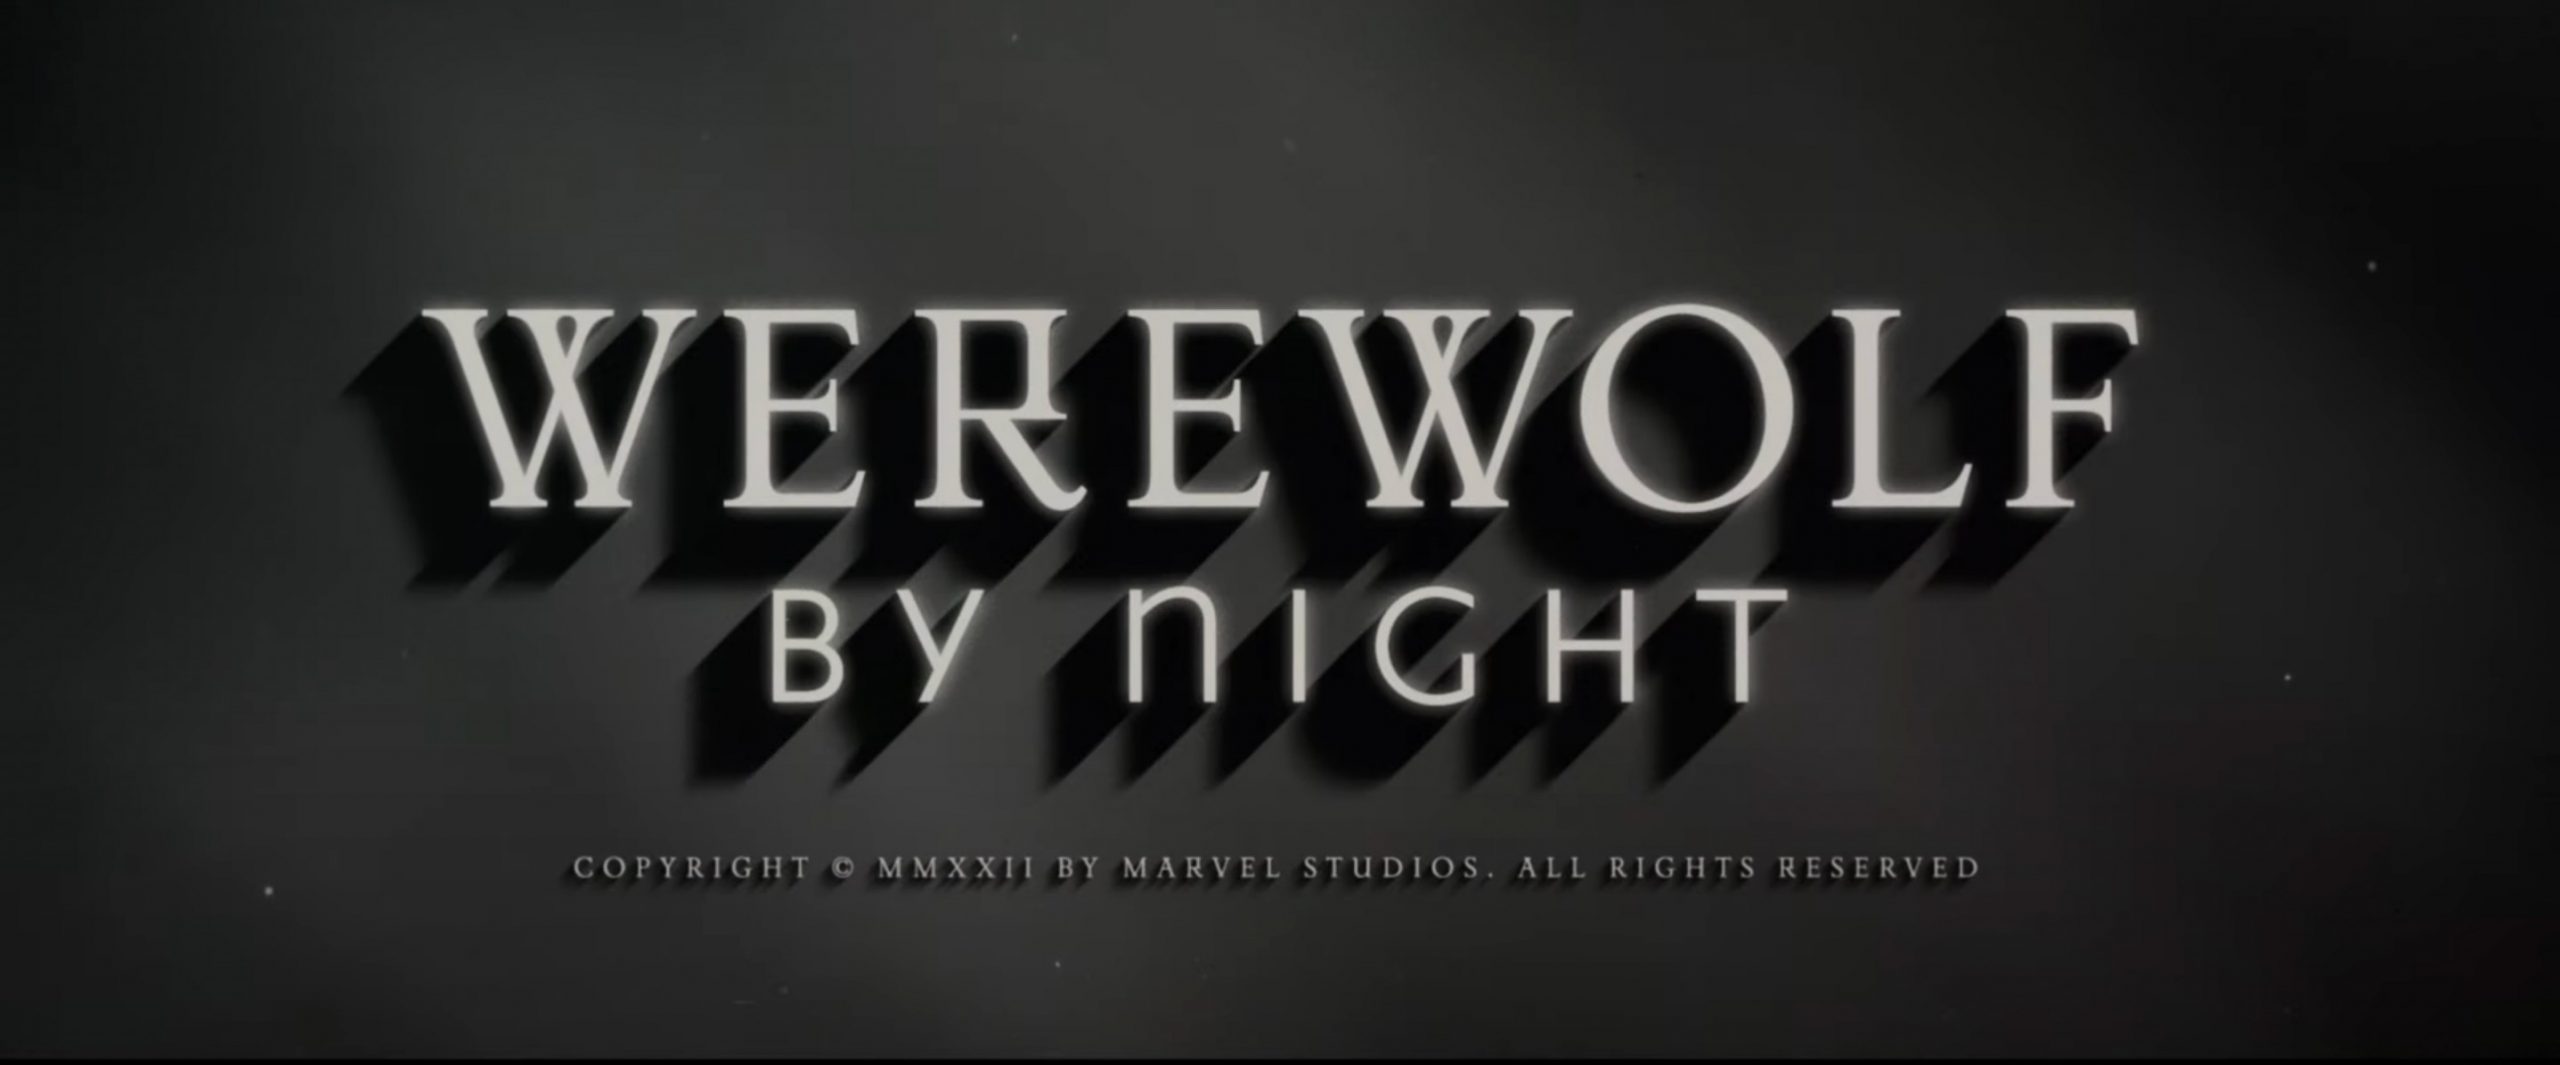 D23 Expo 2022: Disney releases trailer for 'Werewolf by Night' Halloween special